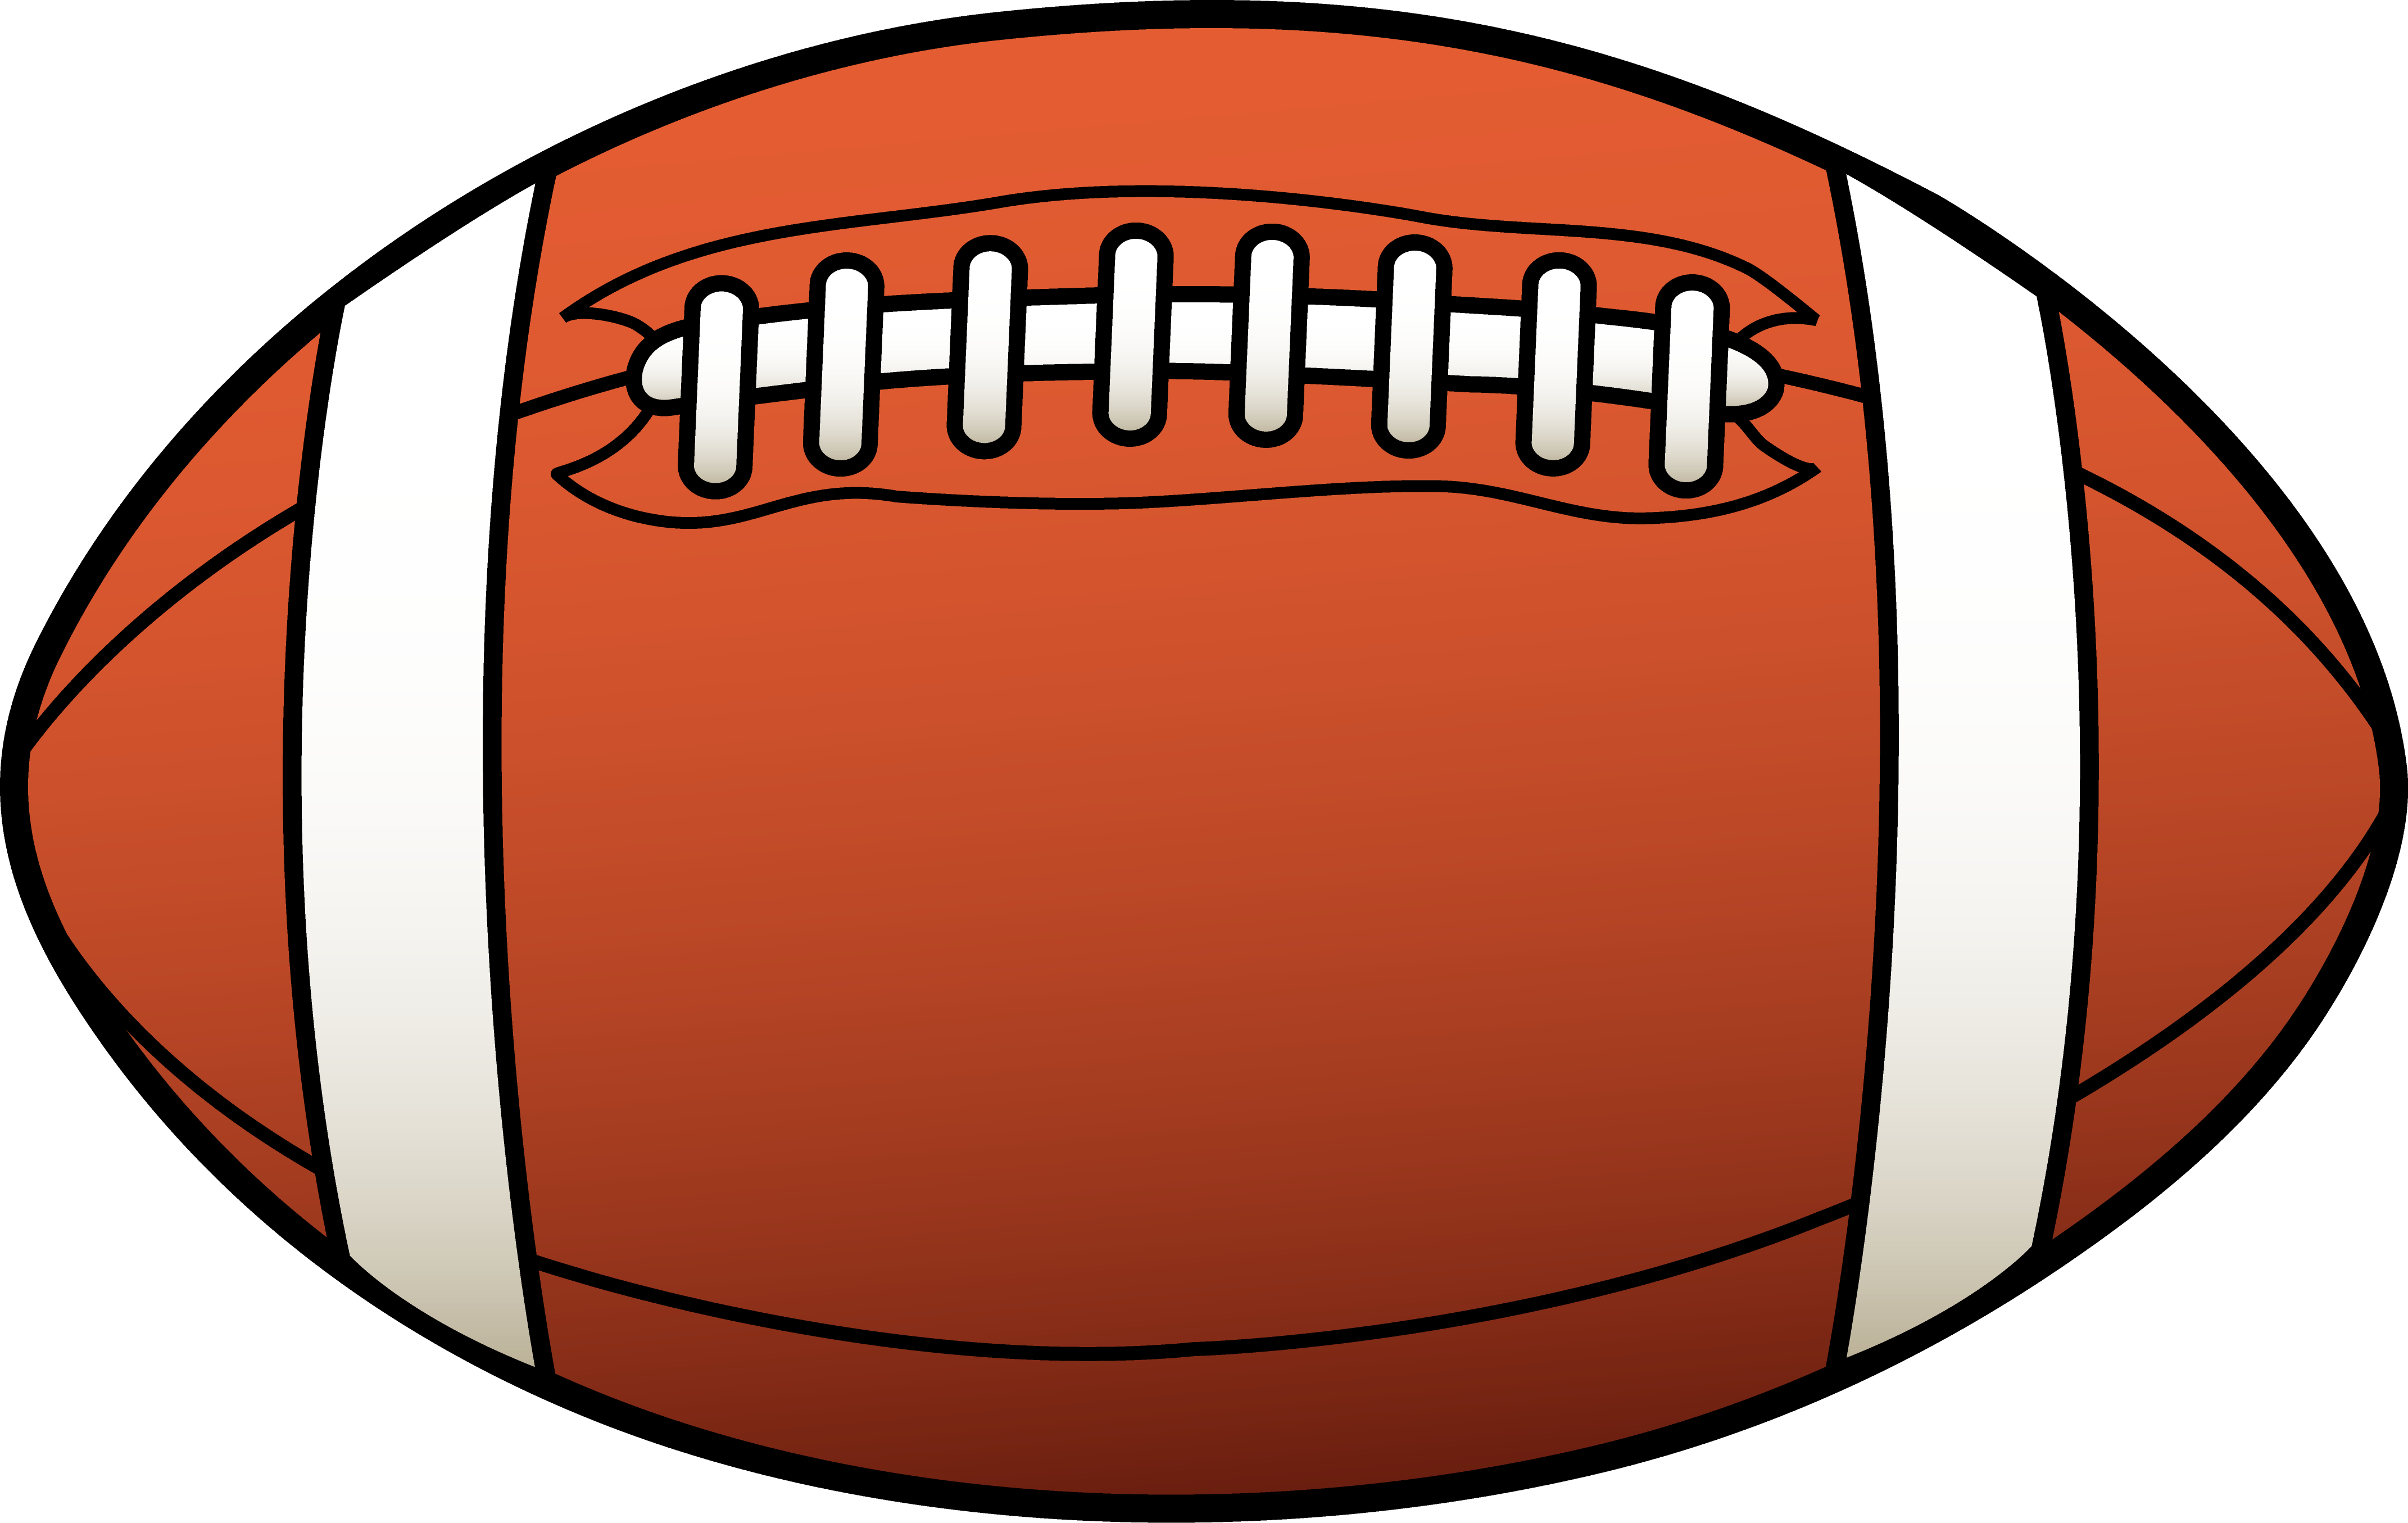 Rugby Ball Or American Football - Oval Shaped Objects Clipart (4285x2710)